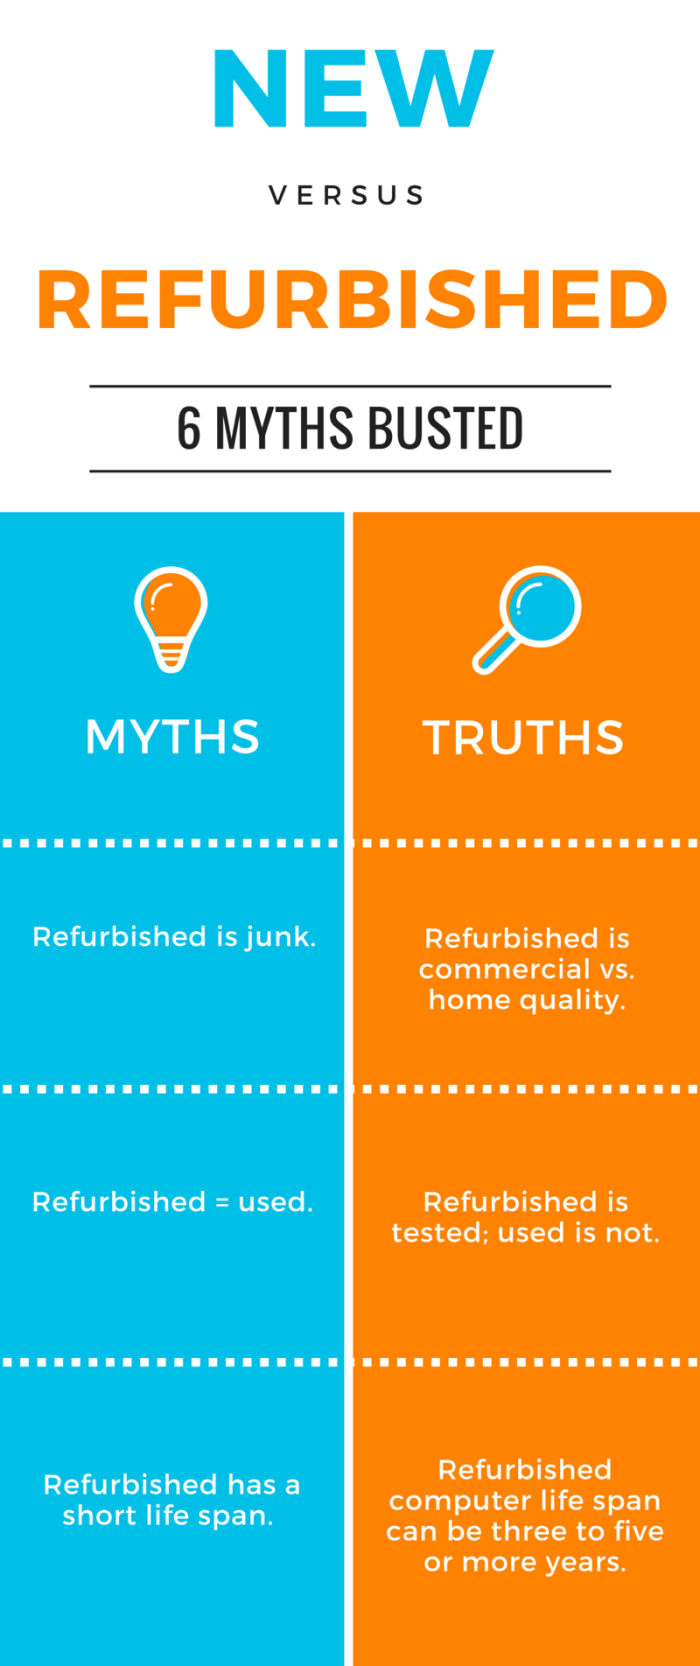 Myth: refurbished is junk. Truth: Refurbished is commercial vs. home quality. Myth: Refurbished = used. Truth: Refurbished is tested; used is not. Myth: Refurbished has a short life span. Truth: Refurbished computer life span can be three to five or more years.